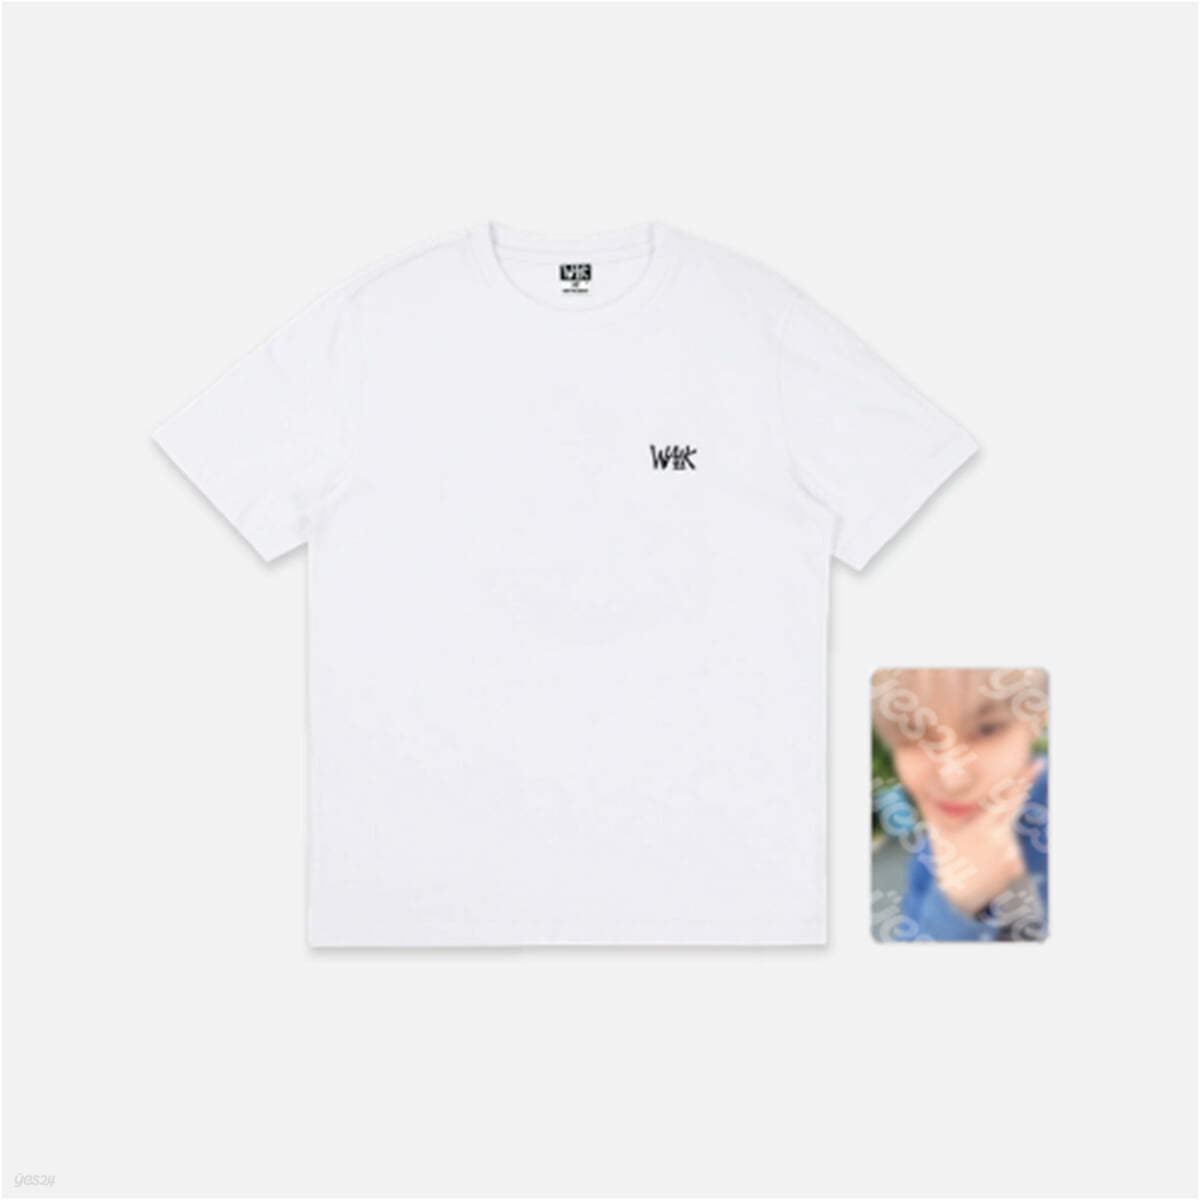 [NCT 127 WALK : ON THE BEAT] T-SHIRT SET (WHITE) [도영 ver.]